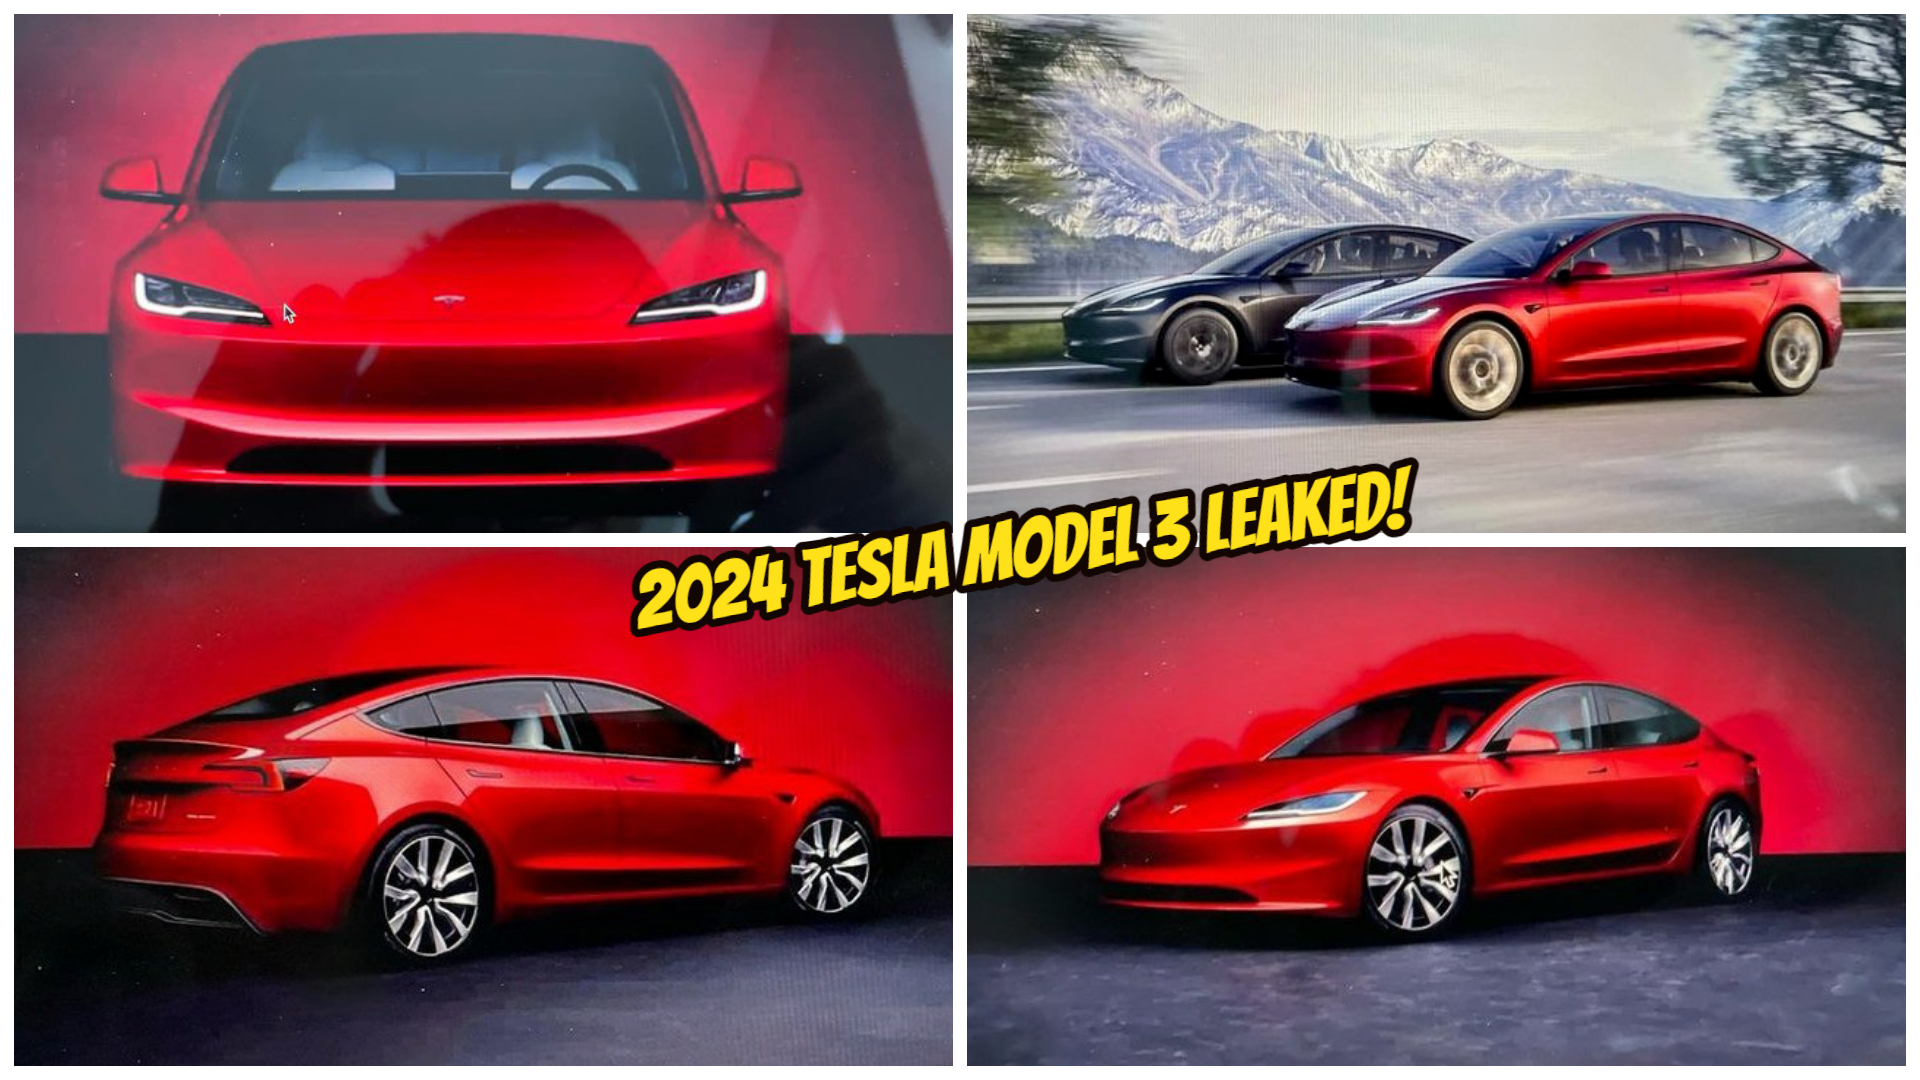 Leaked Photos Show the 2024 Tesla Model 3 Hours Before the Alleged